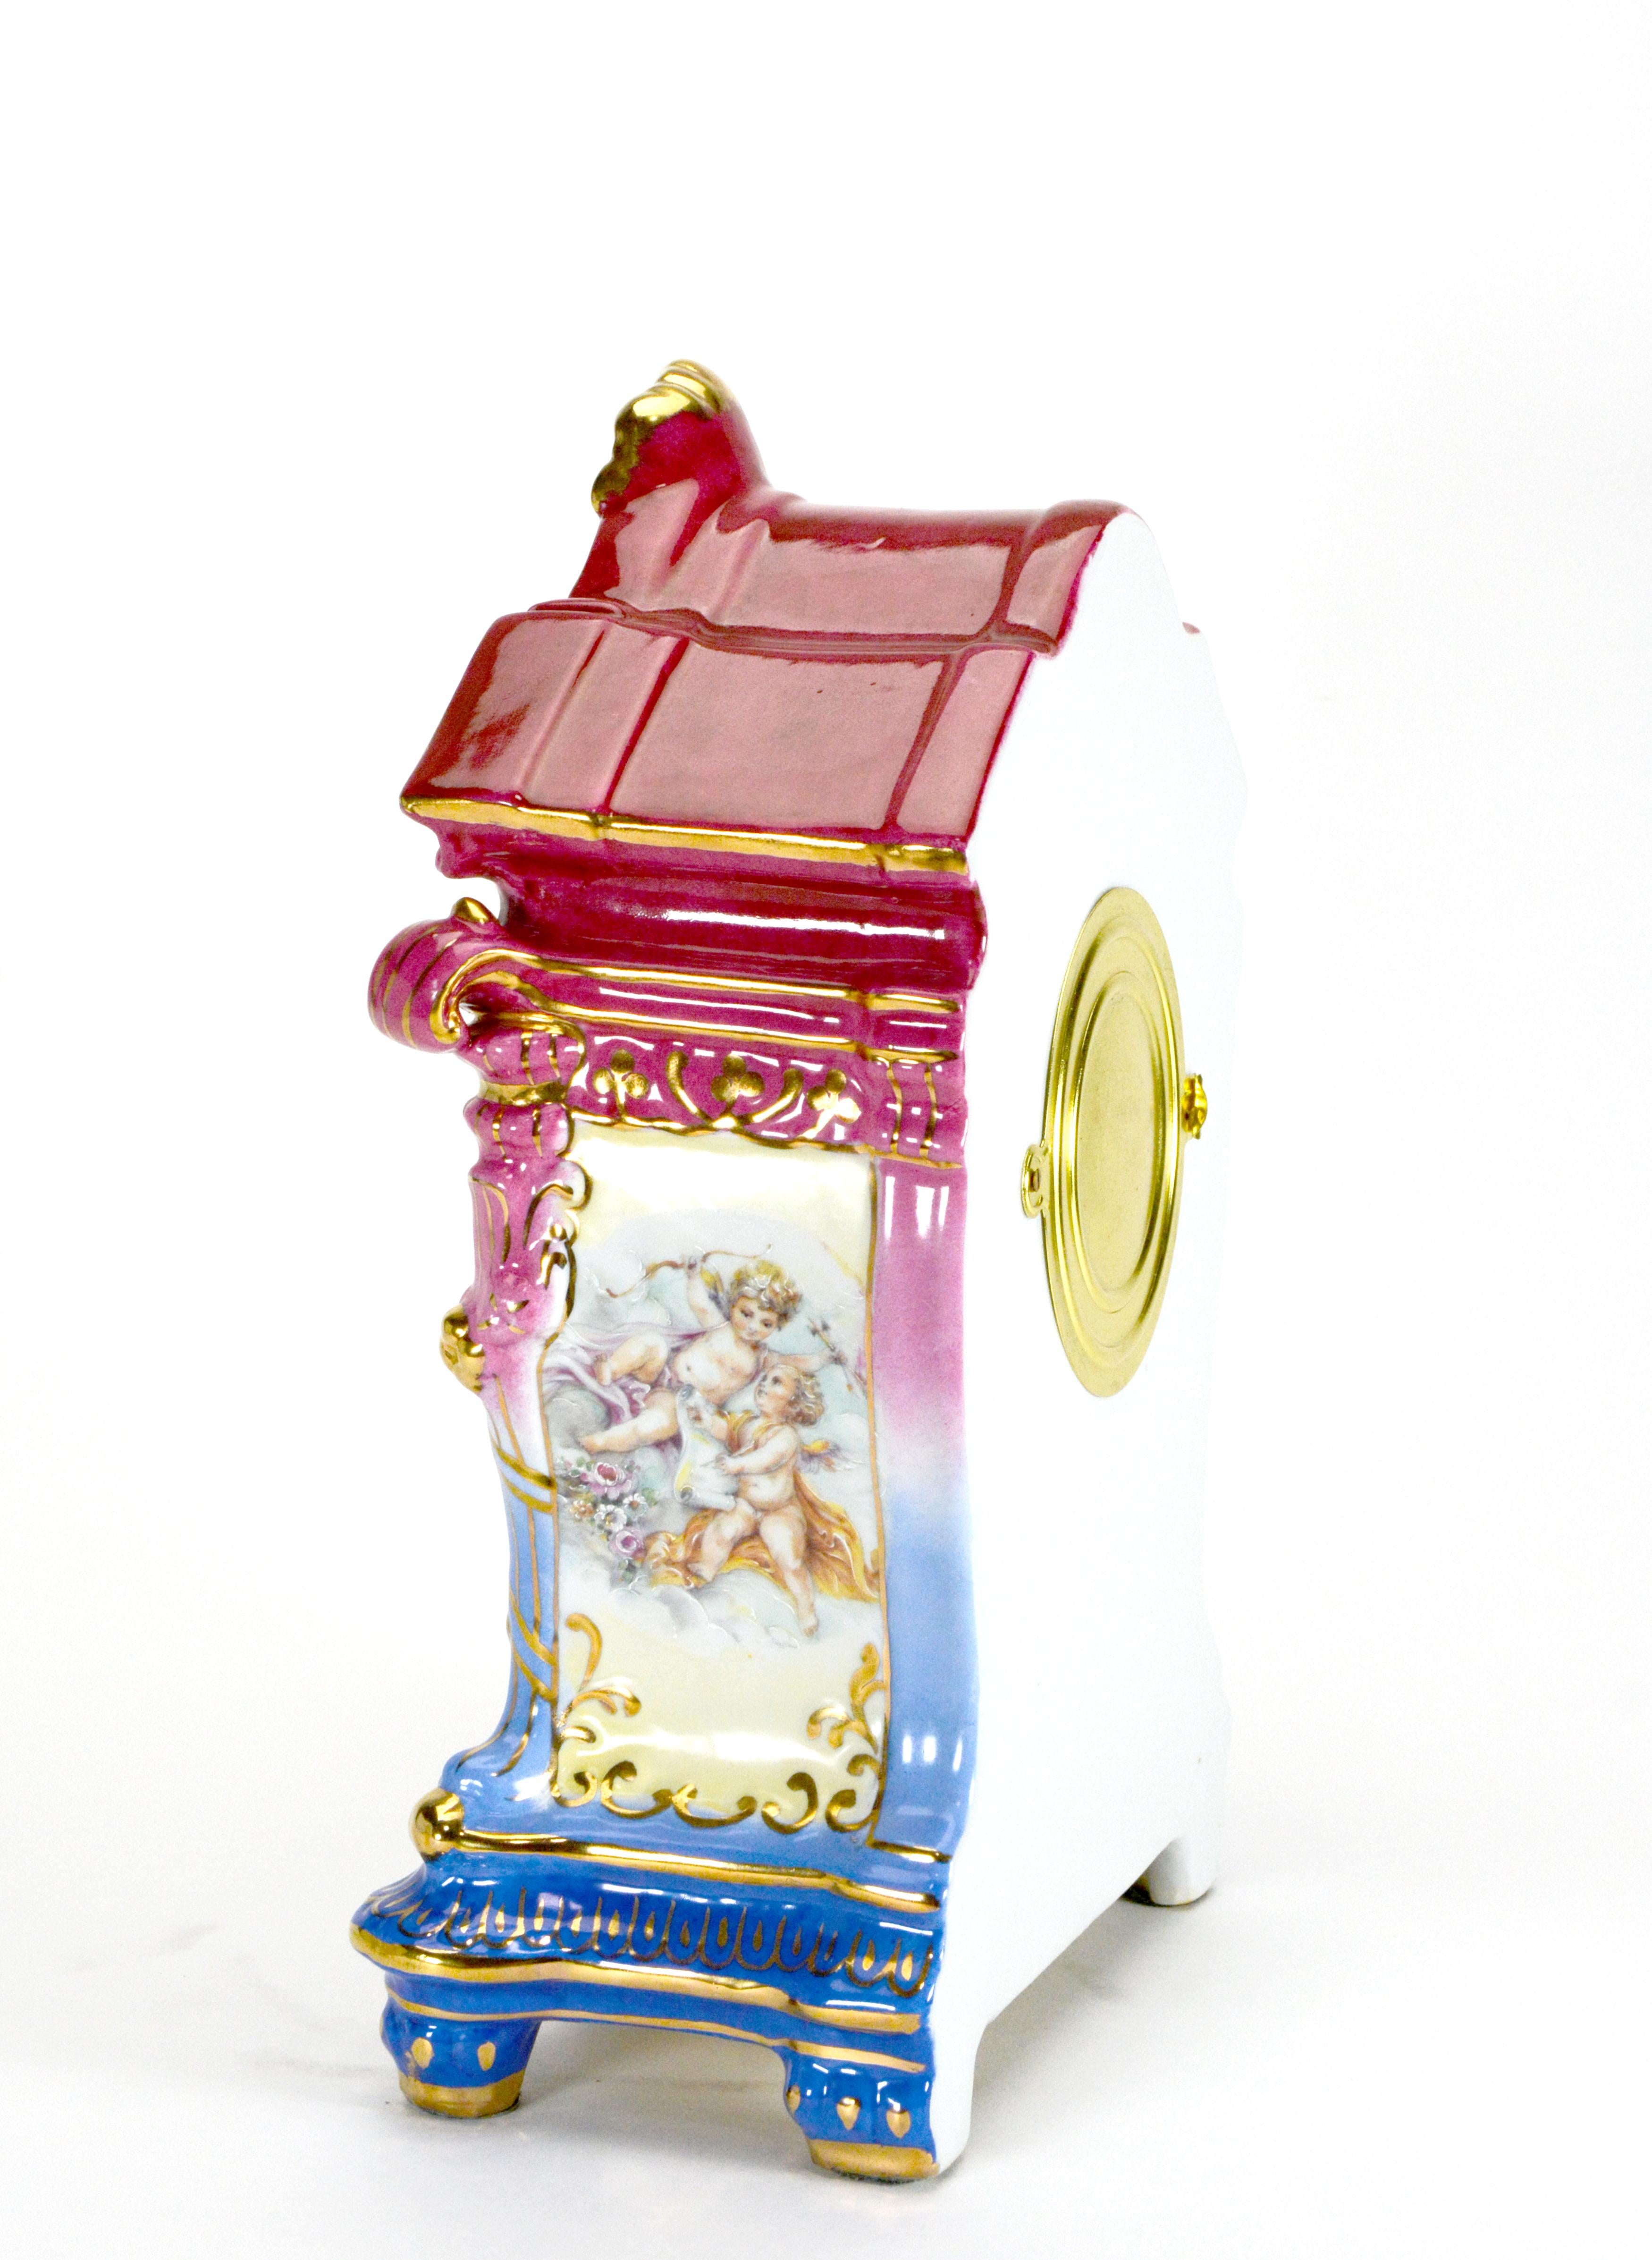 Ansonia Style Visible Escapement Pink & Blue Floral 24K Porcelain Mantle Clock In Good Condition For Sale In Danville, CA